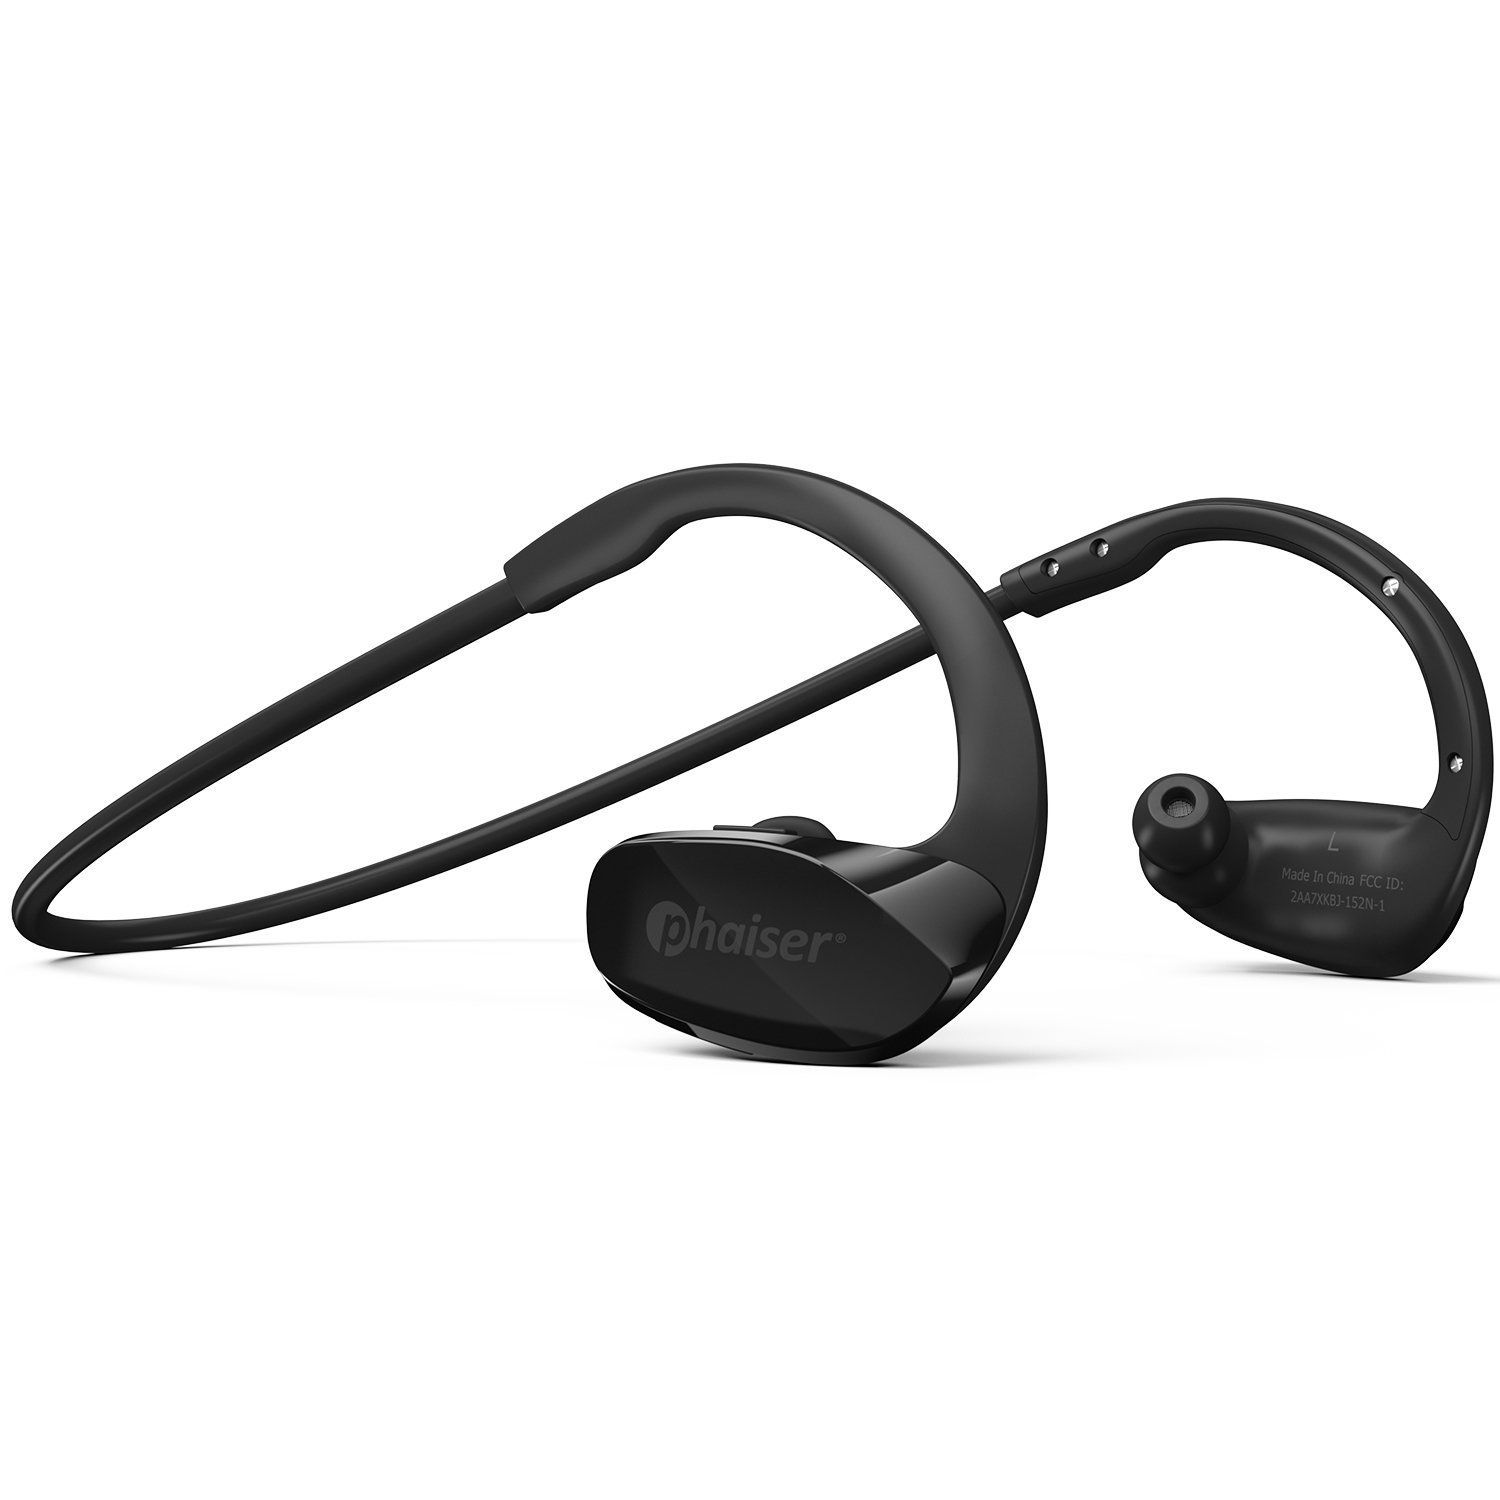 Brand new in box Bluetooth Headphones for Running, Wireless Earbuds for Exercise or Gym Workout, Sweatproof Stereo Earphones, Durable Cordless Sport